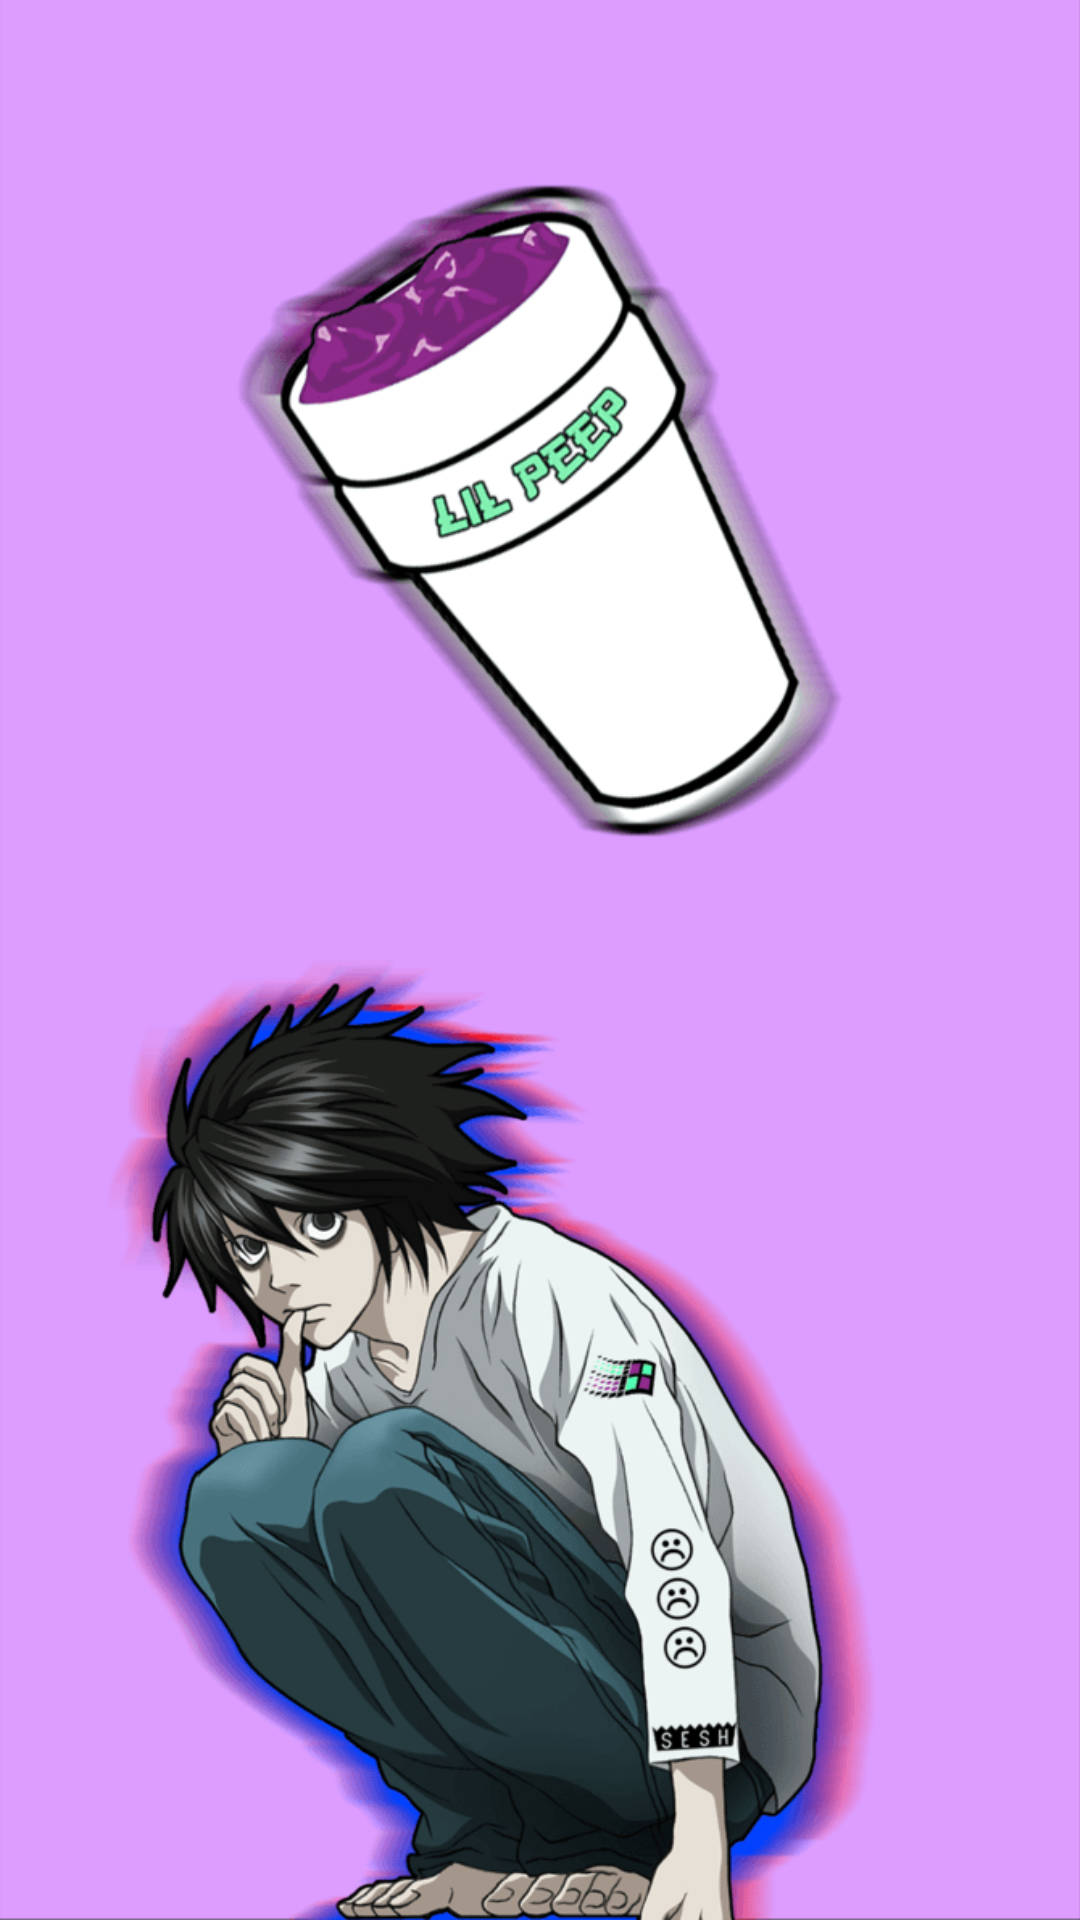 Wallpaper ID 334204  Anime Death Note Phone Wallpaper  1440x2560 free  download